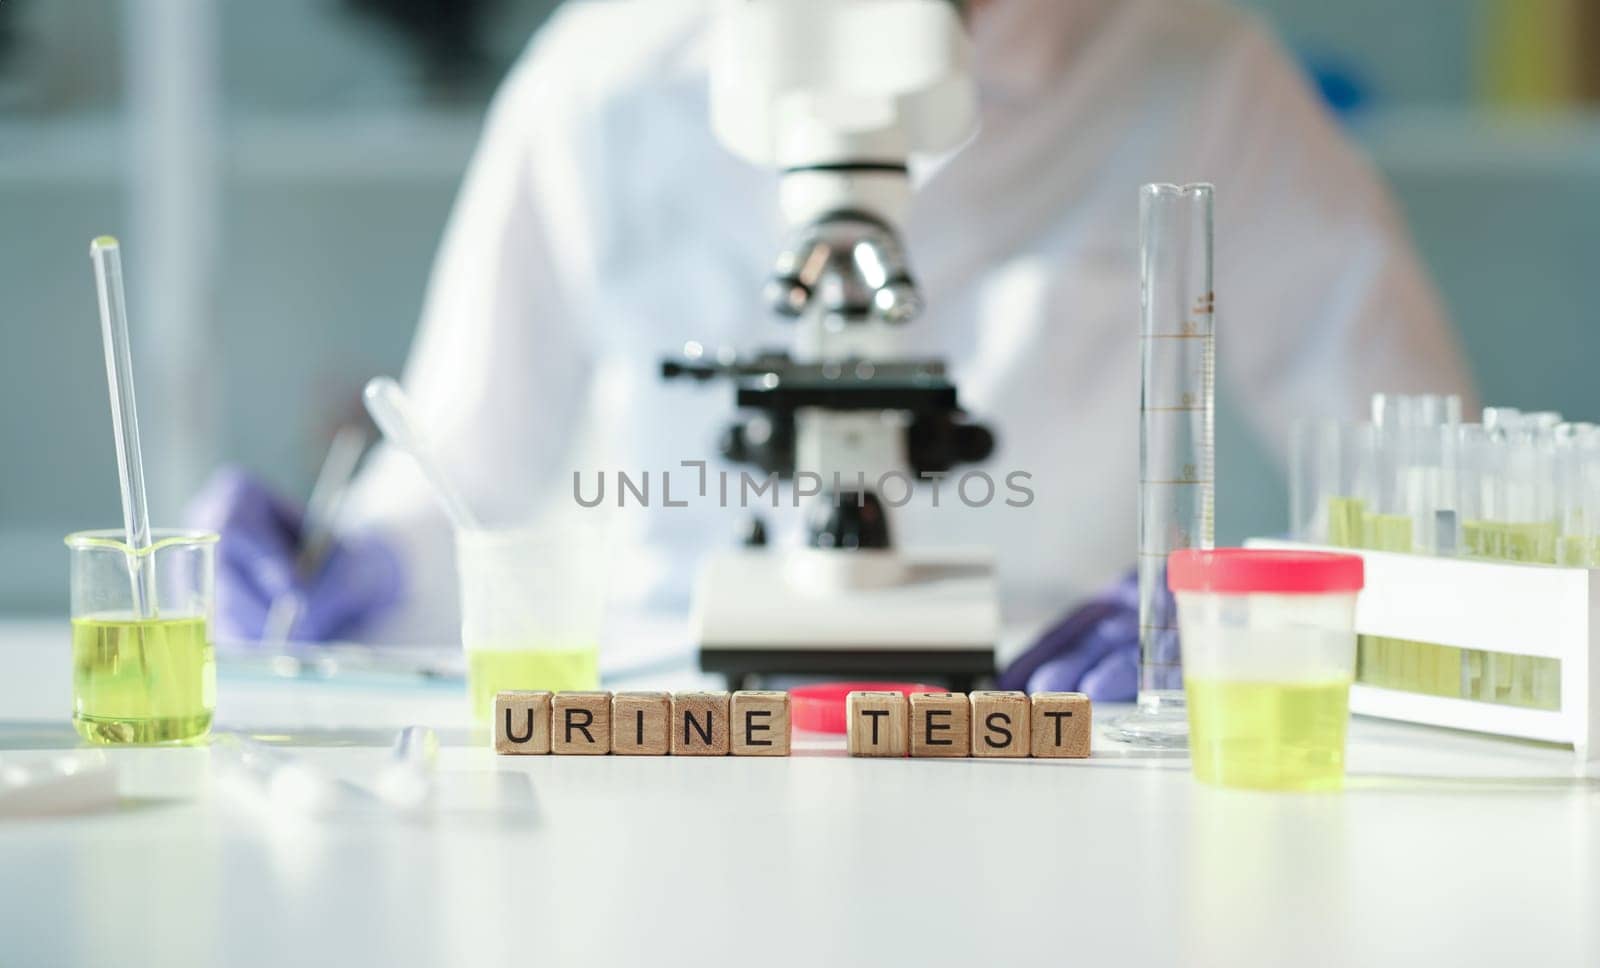 Word urine test on wooden cubes against background of microscope and jars in lab closeup. Laboratory diagnosis of diseases of urinary system concept